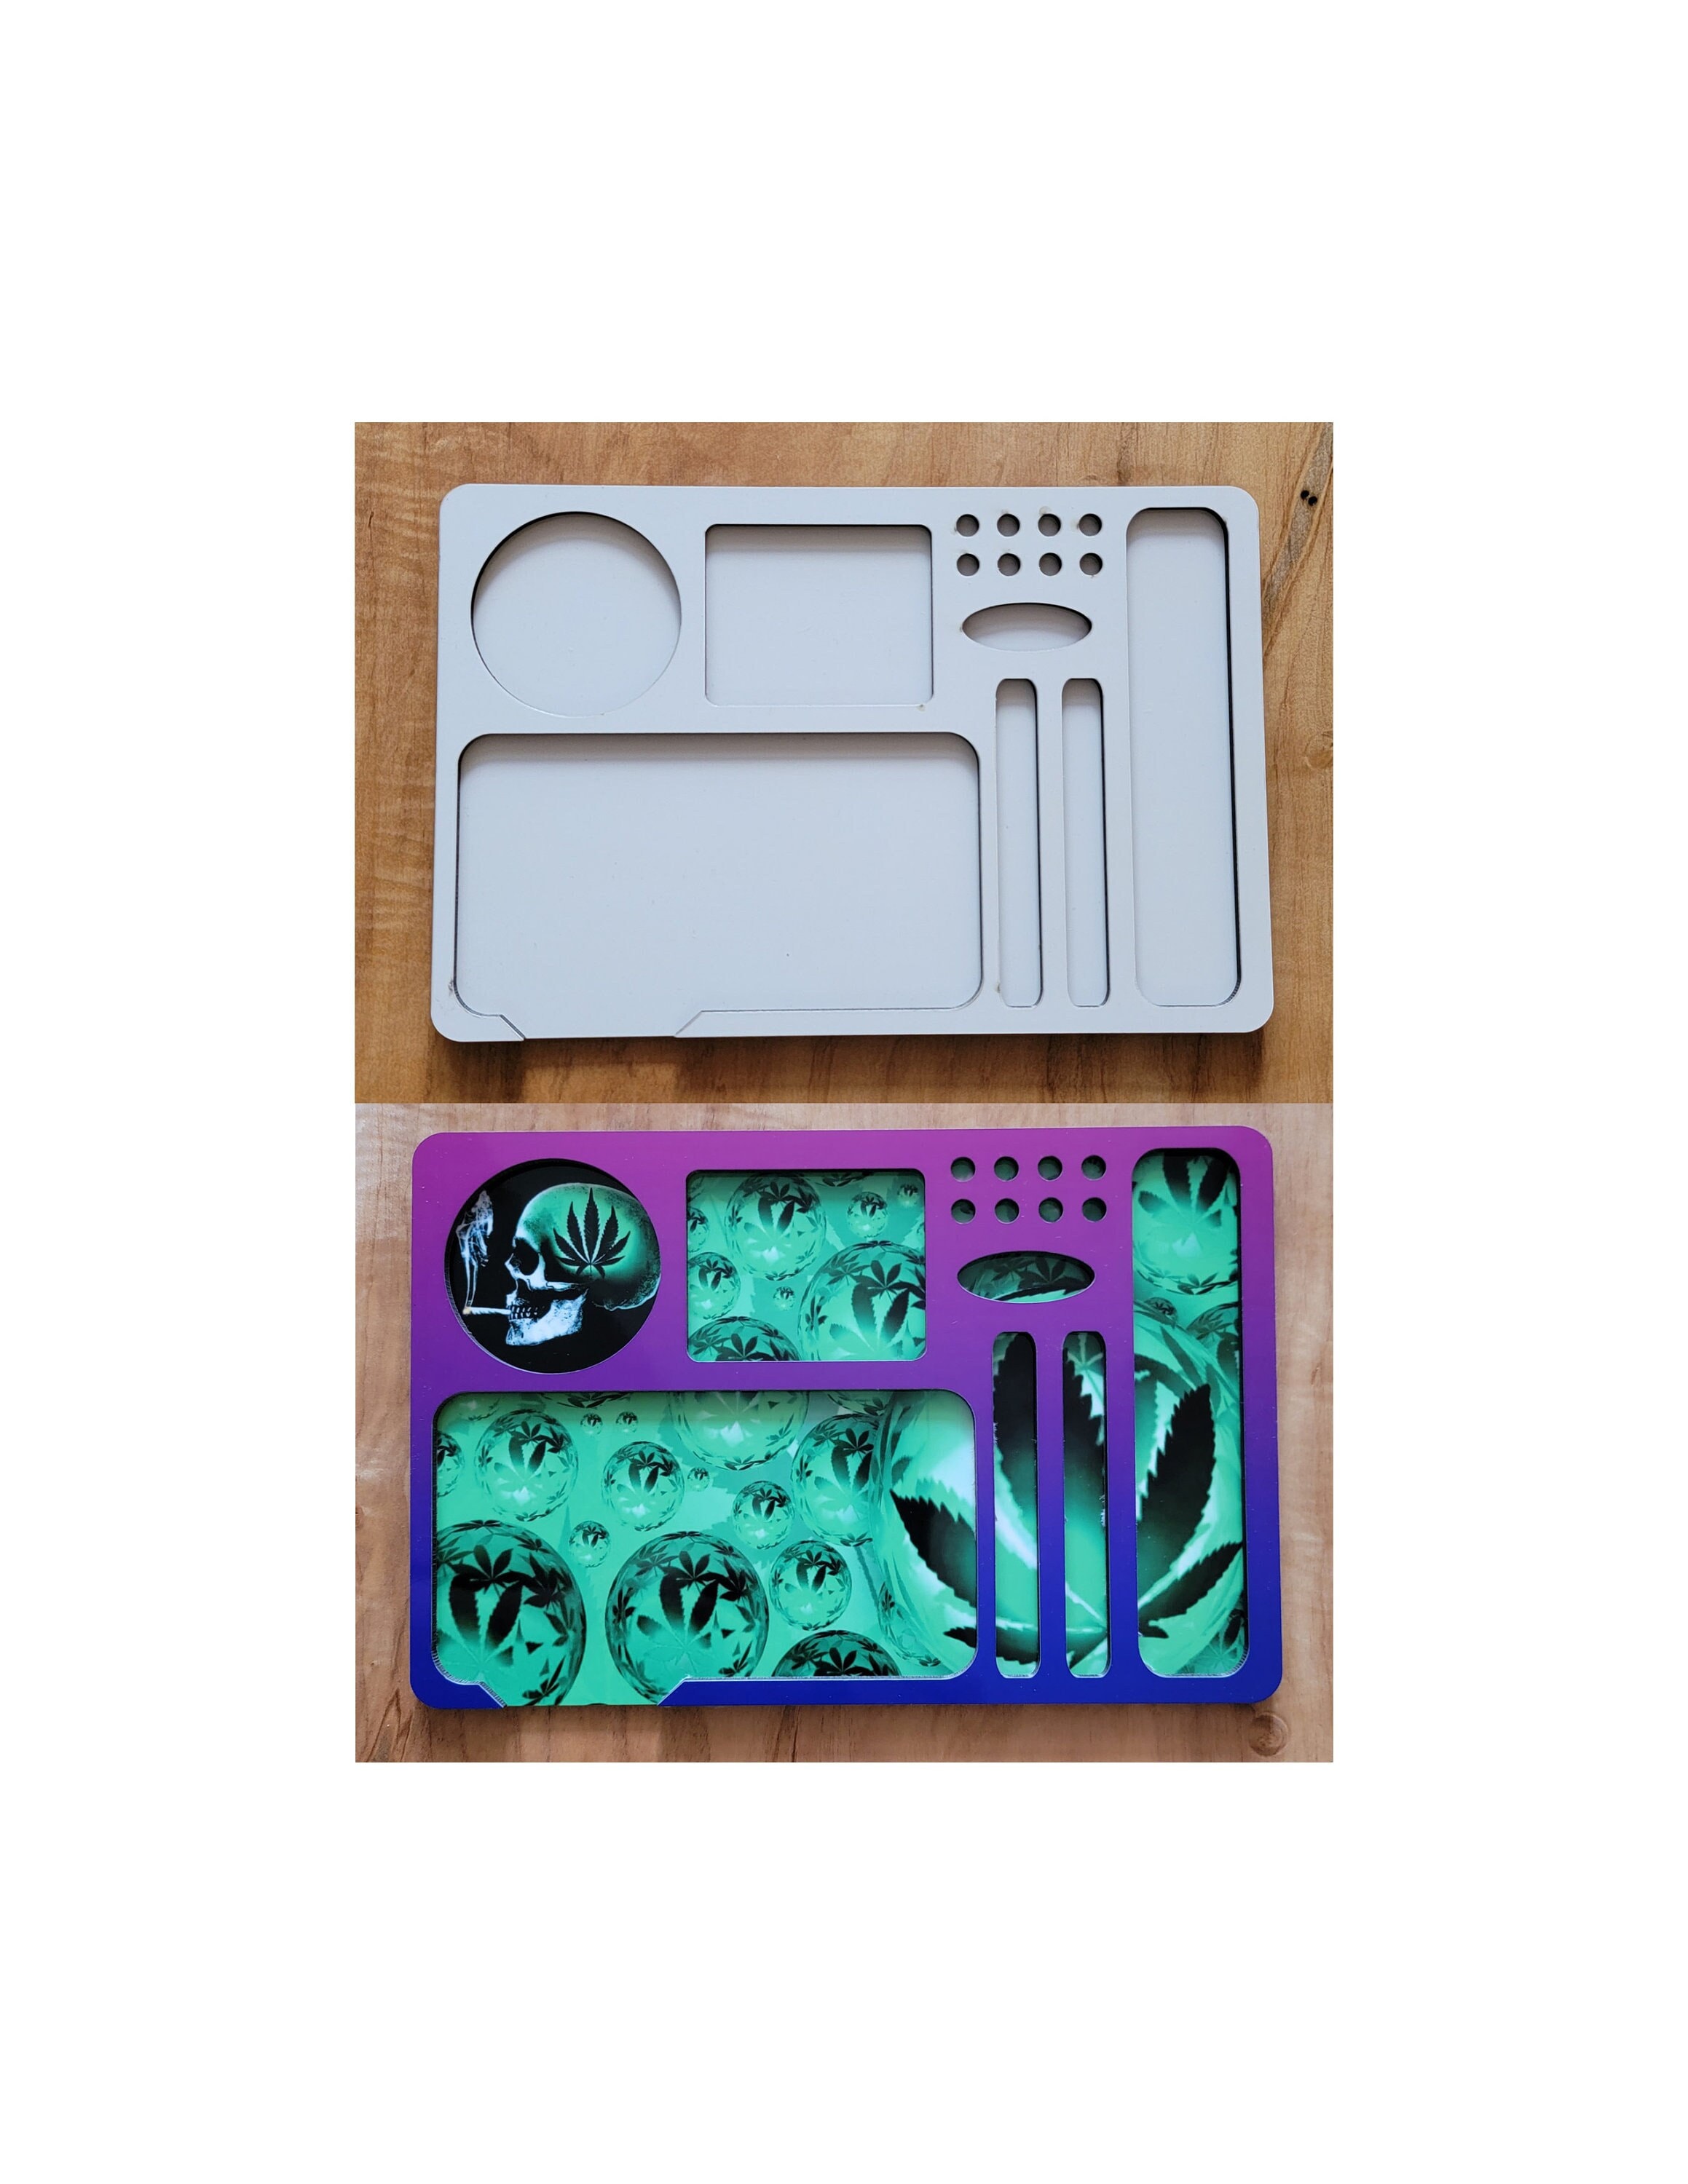 5 Piece Custom Rolling Tray Set for Tobacco or Cannabis Kush Queen